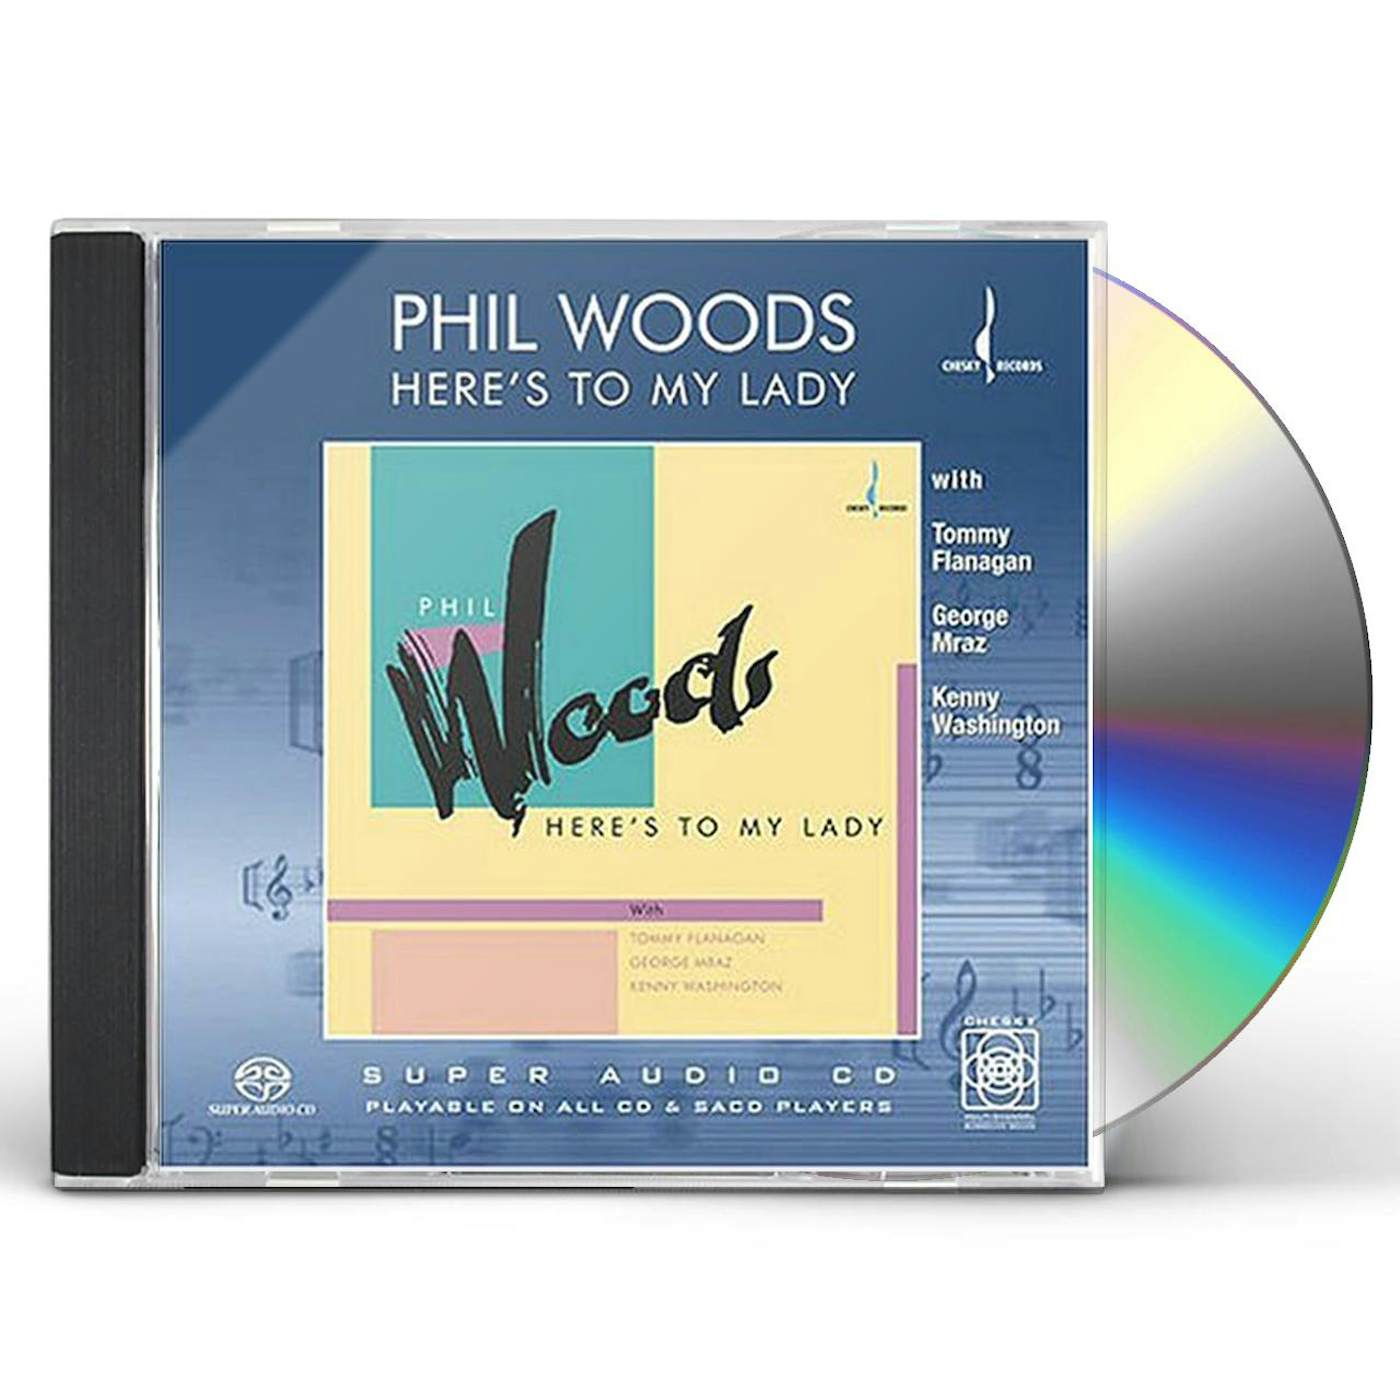 Phil Woods HERE'S TO MY LADY CD